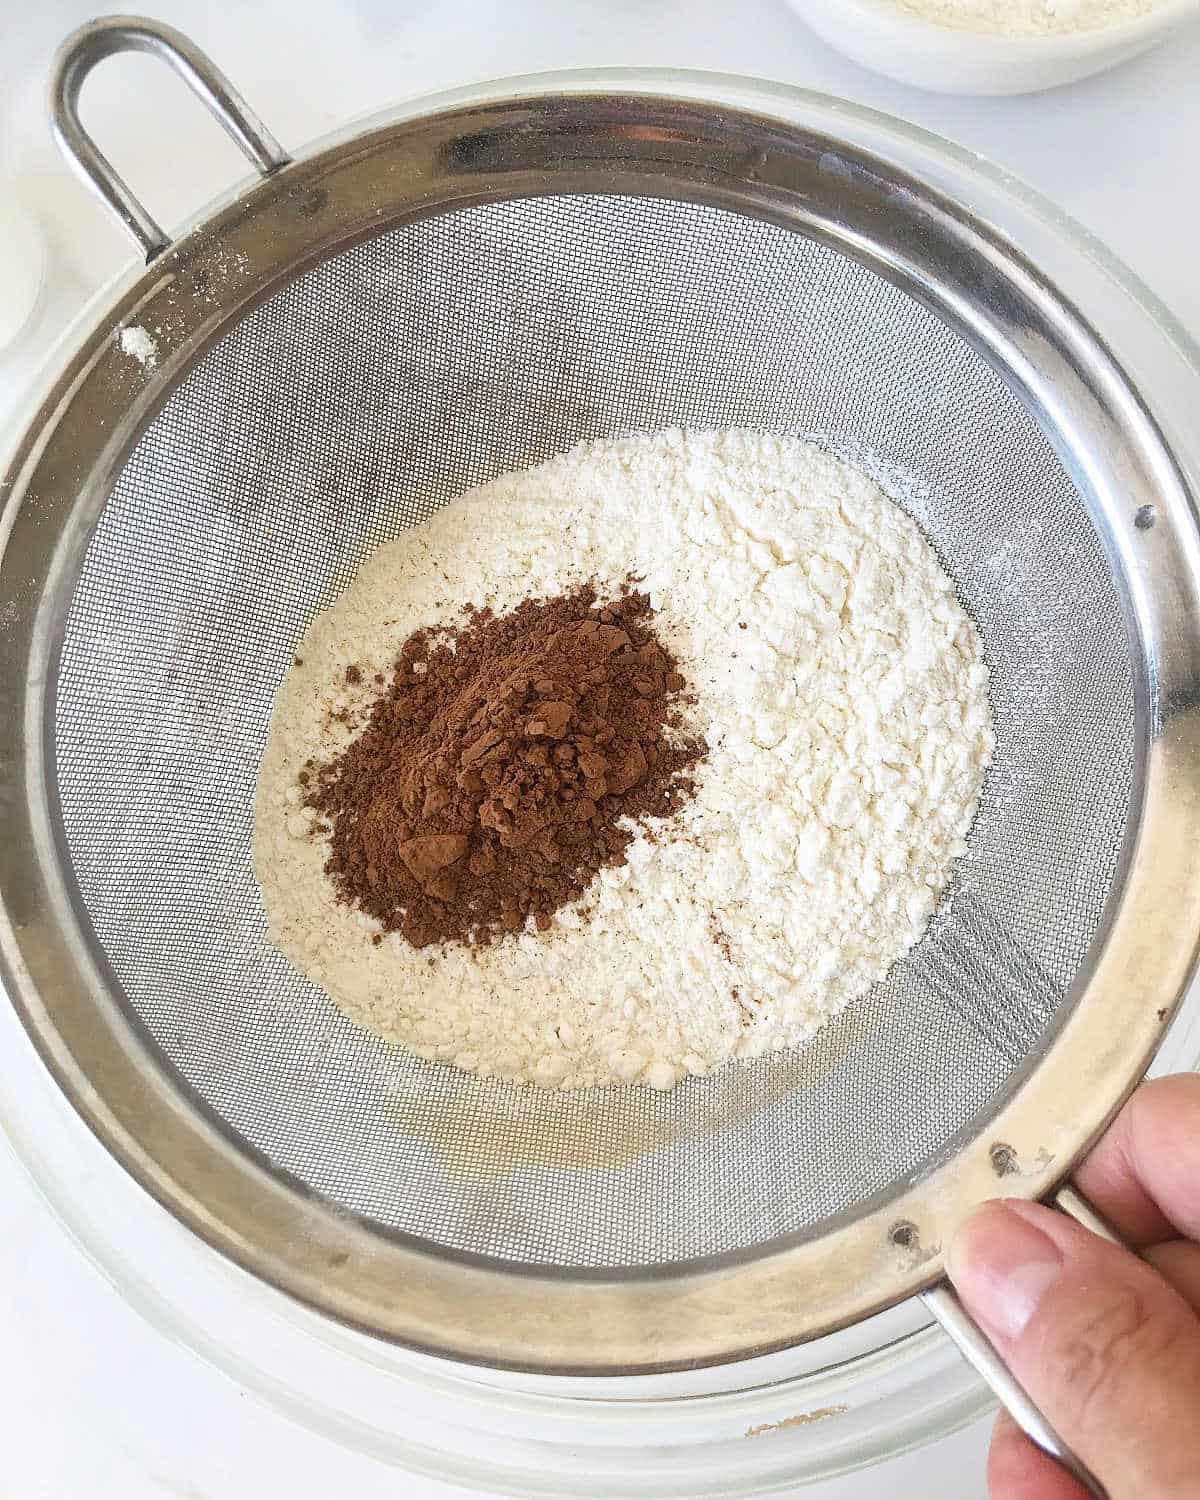 Sifting flour and cocoa powder over a glass bowl.